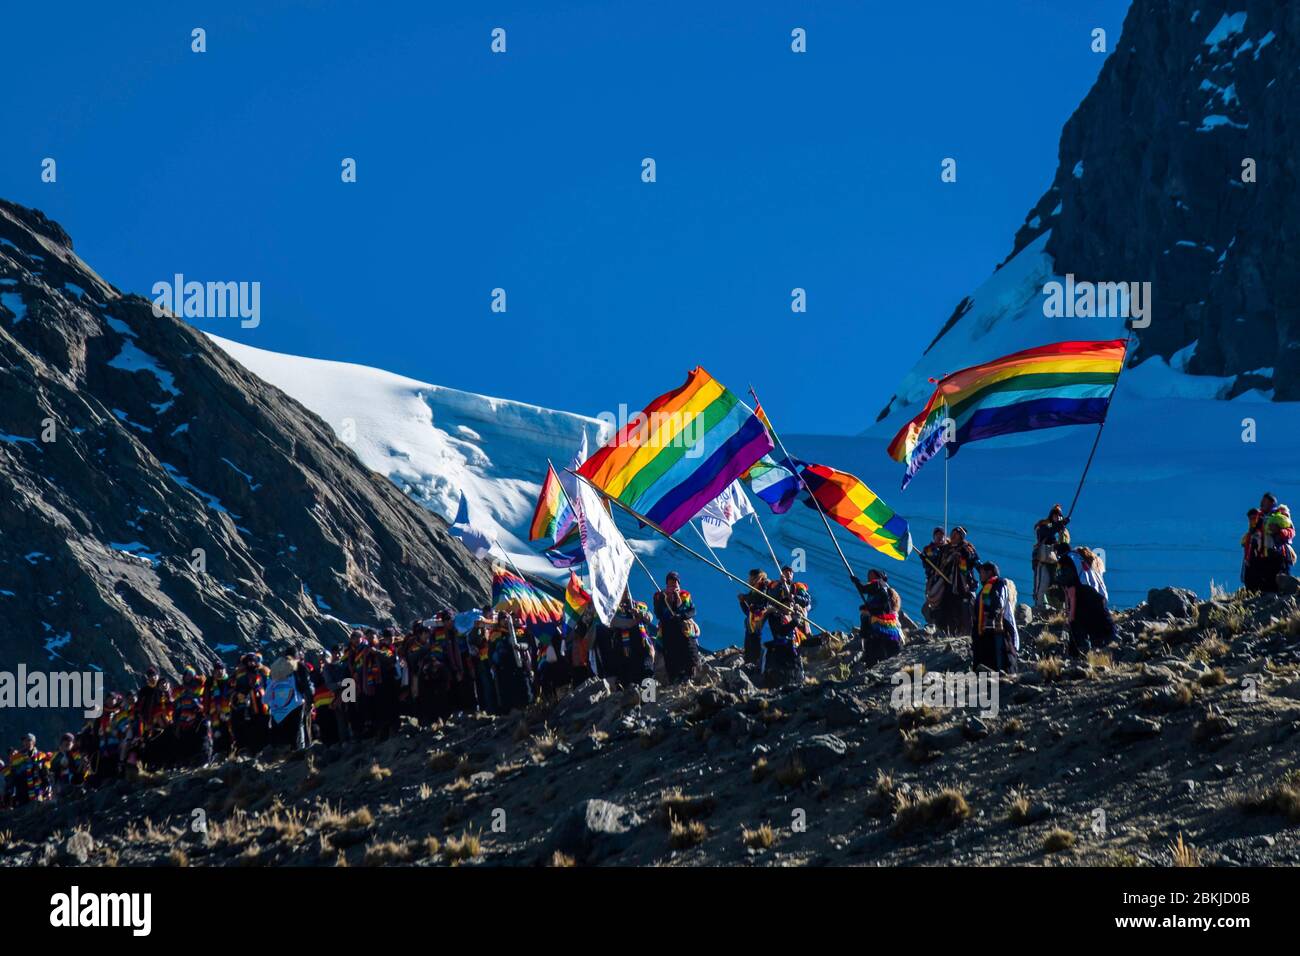 Peru, Cusco, Mahuayani, Cordillera de Sinakara, pilgrimage of Qoyllur R'iti, triumphant descent of the brotherhoods from the glaciers to the sanctuary, brandishing the banners in the colors of the Tawantisuyu, the ancient Inca empire Stock Photo